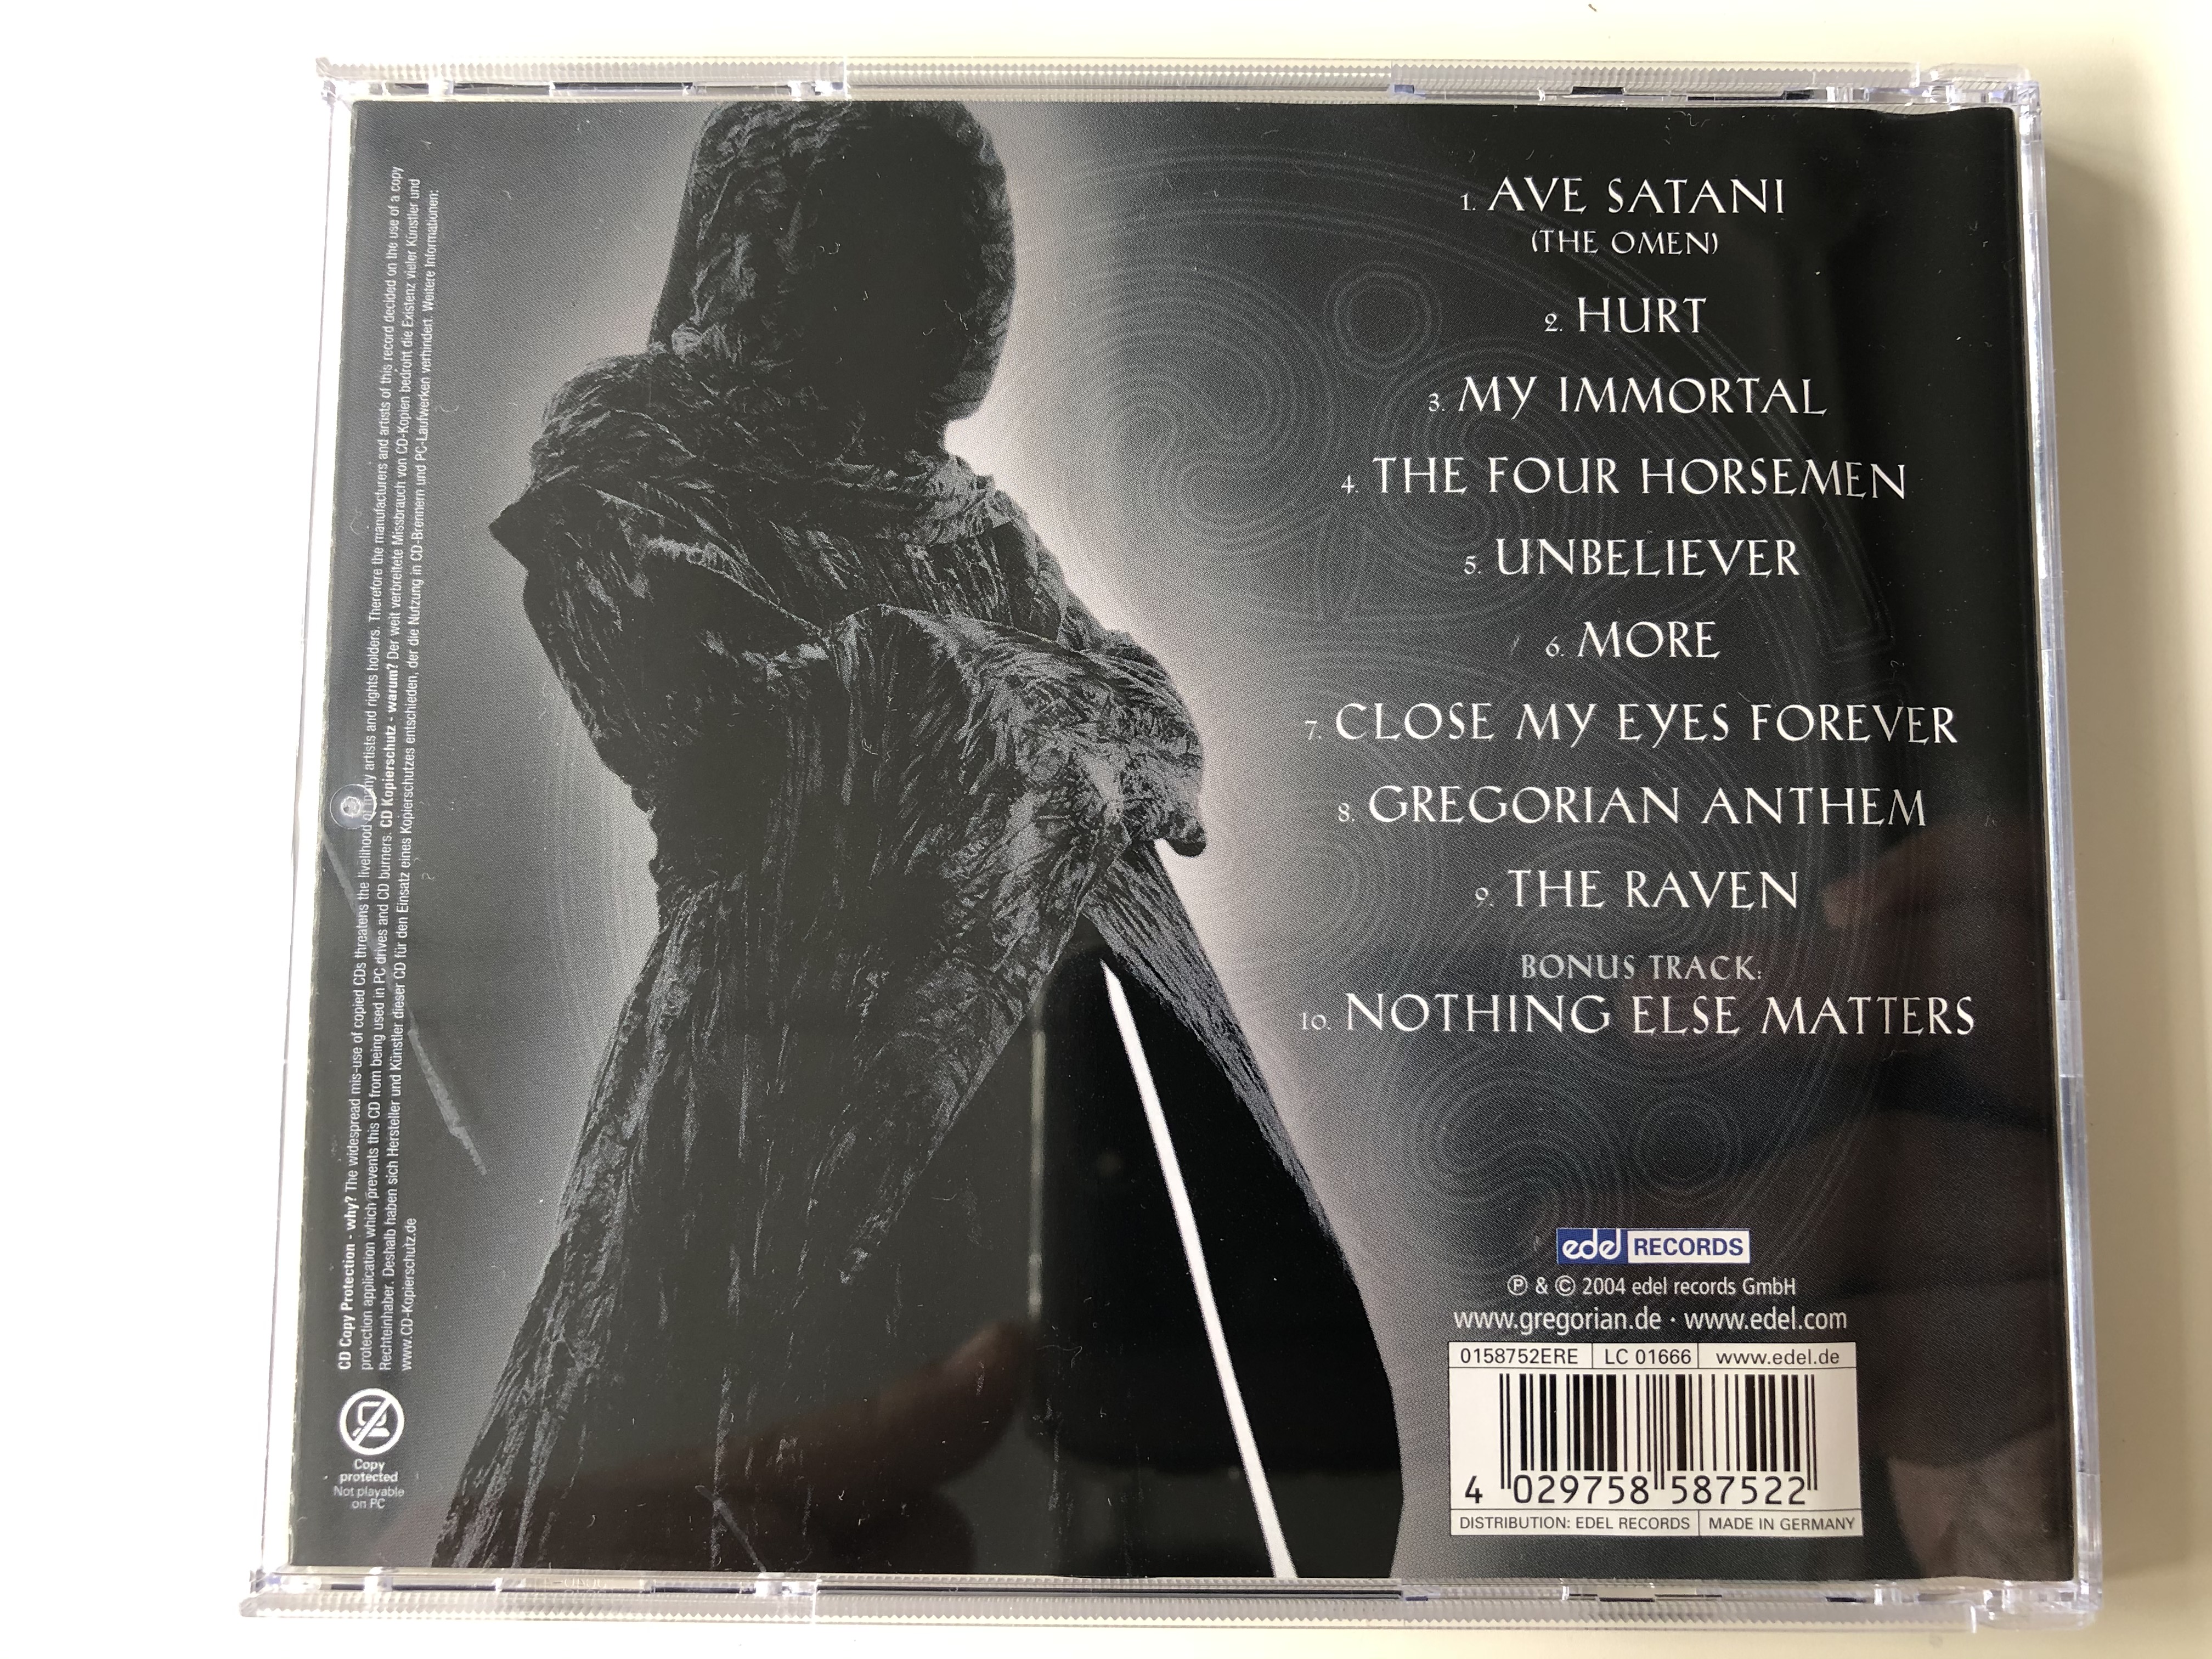 gregorian-the-dark-side-special-rock-edition-the-original-incl.-hits-known-from-evanescence-sister-of-mercy-metallica-etc.-edel-records-audio-cd-2004-0158752ere-5-.jpg